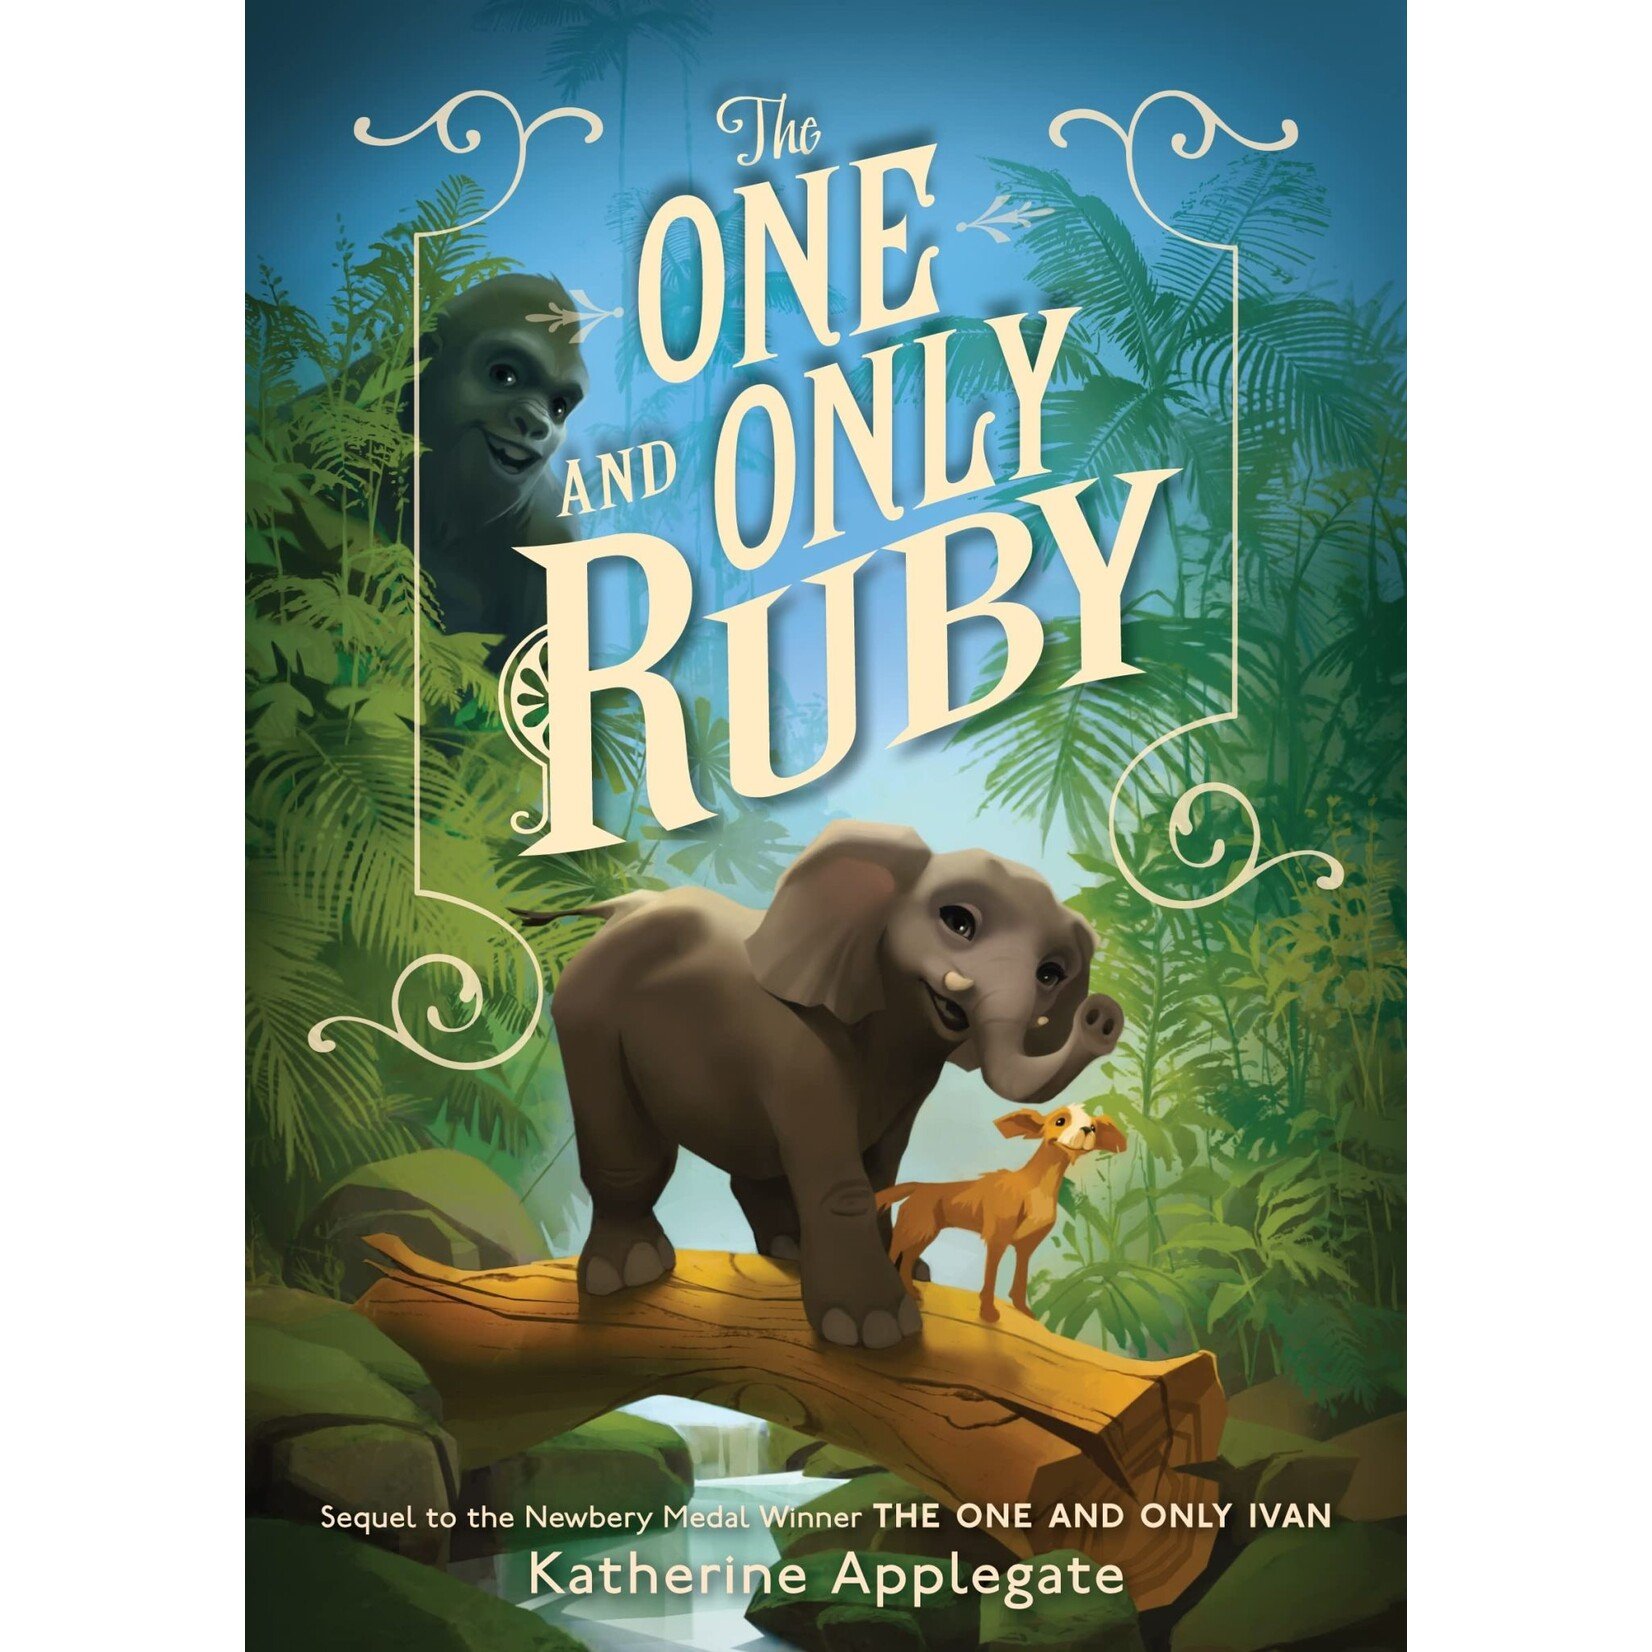 The One and Only Ruby (The One and Only Ivan #3) - Maxima Gift and Book  Center